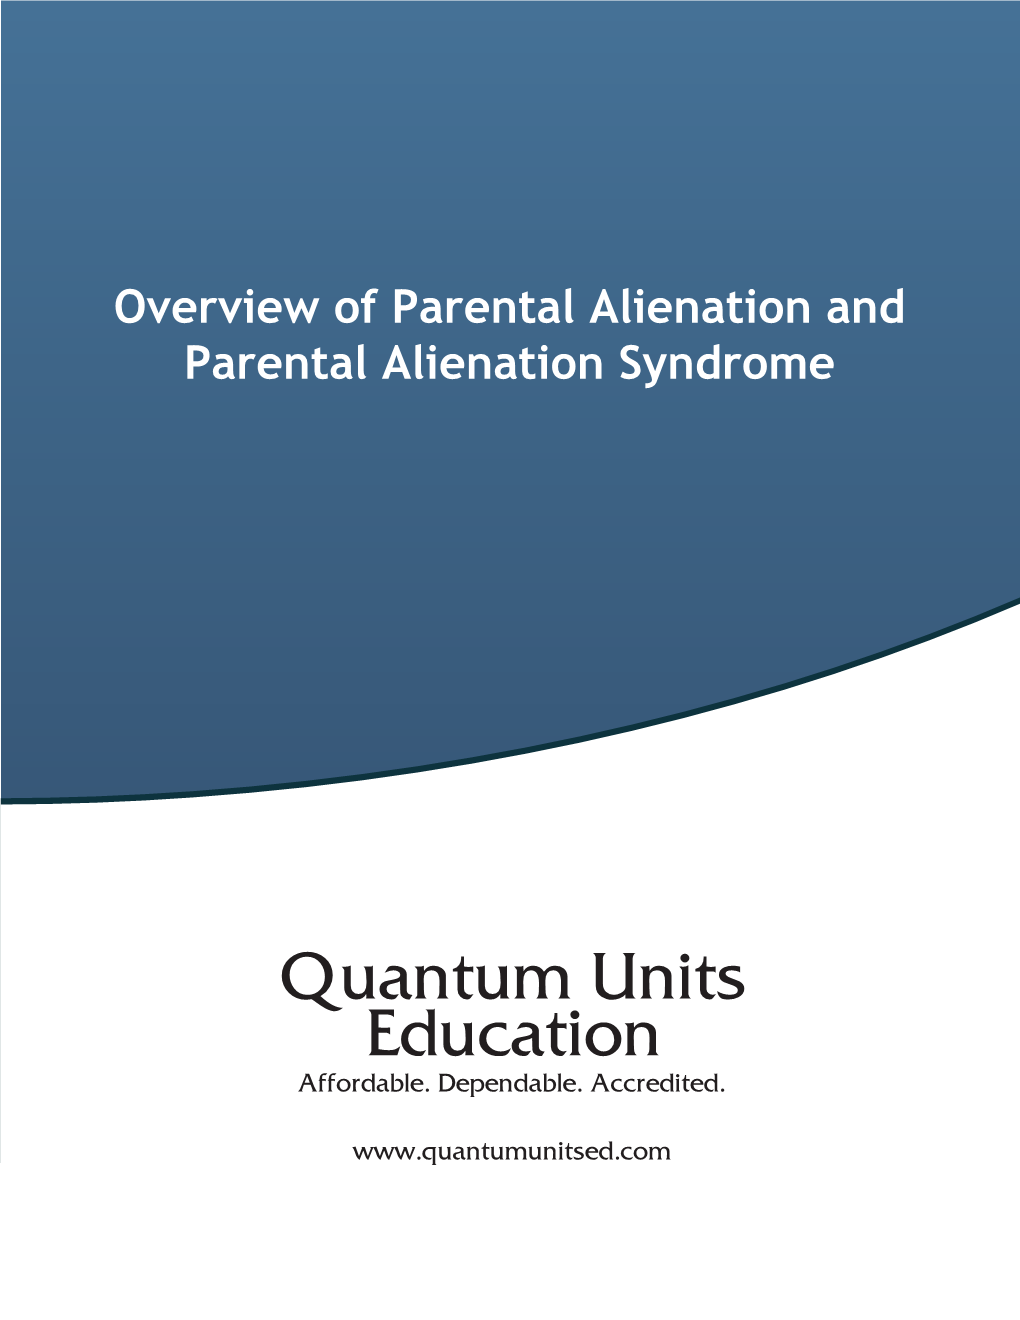 Overview of Parental Alienation and Parental Alienation Syndrome